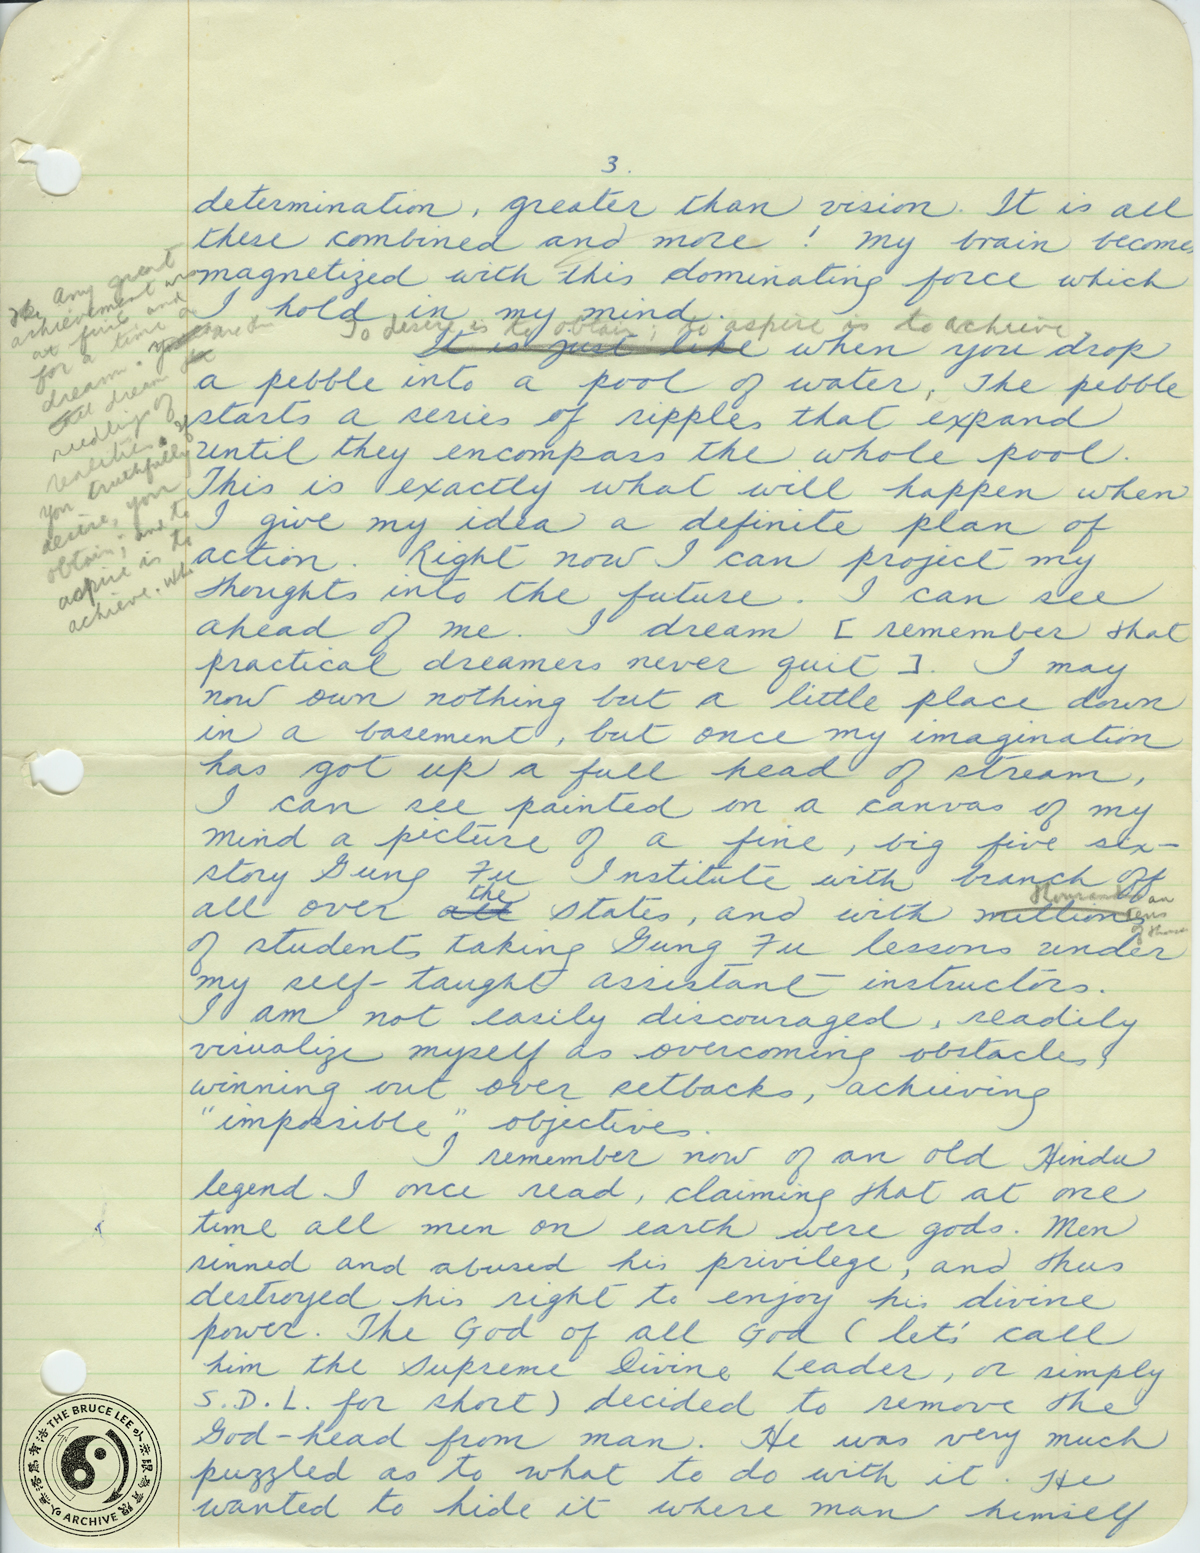 Letter-to-Pearl-draft-pg.3-archive.jpg